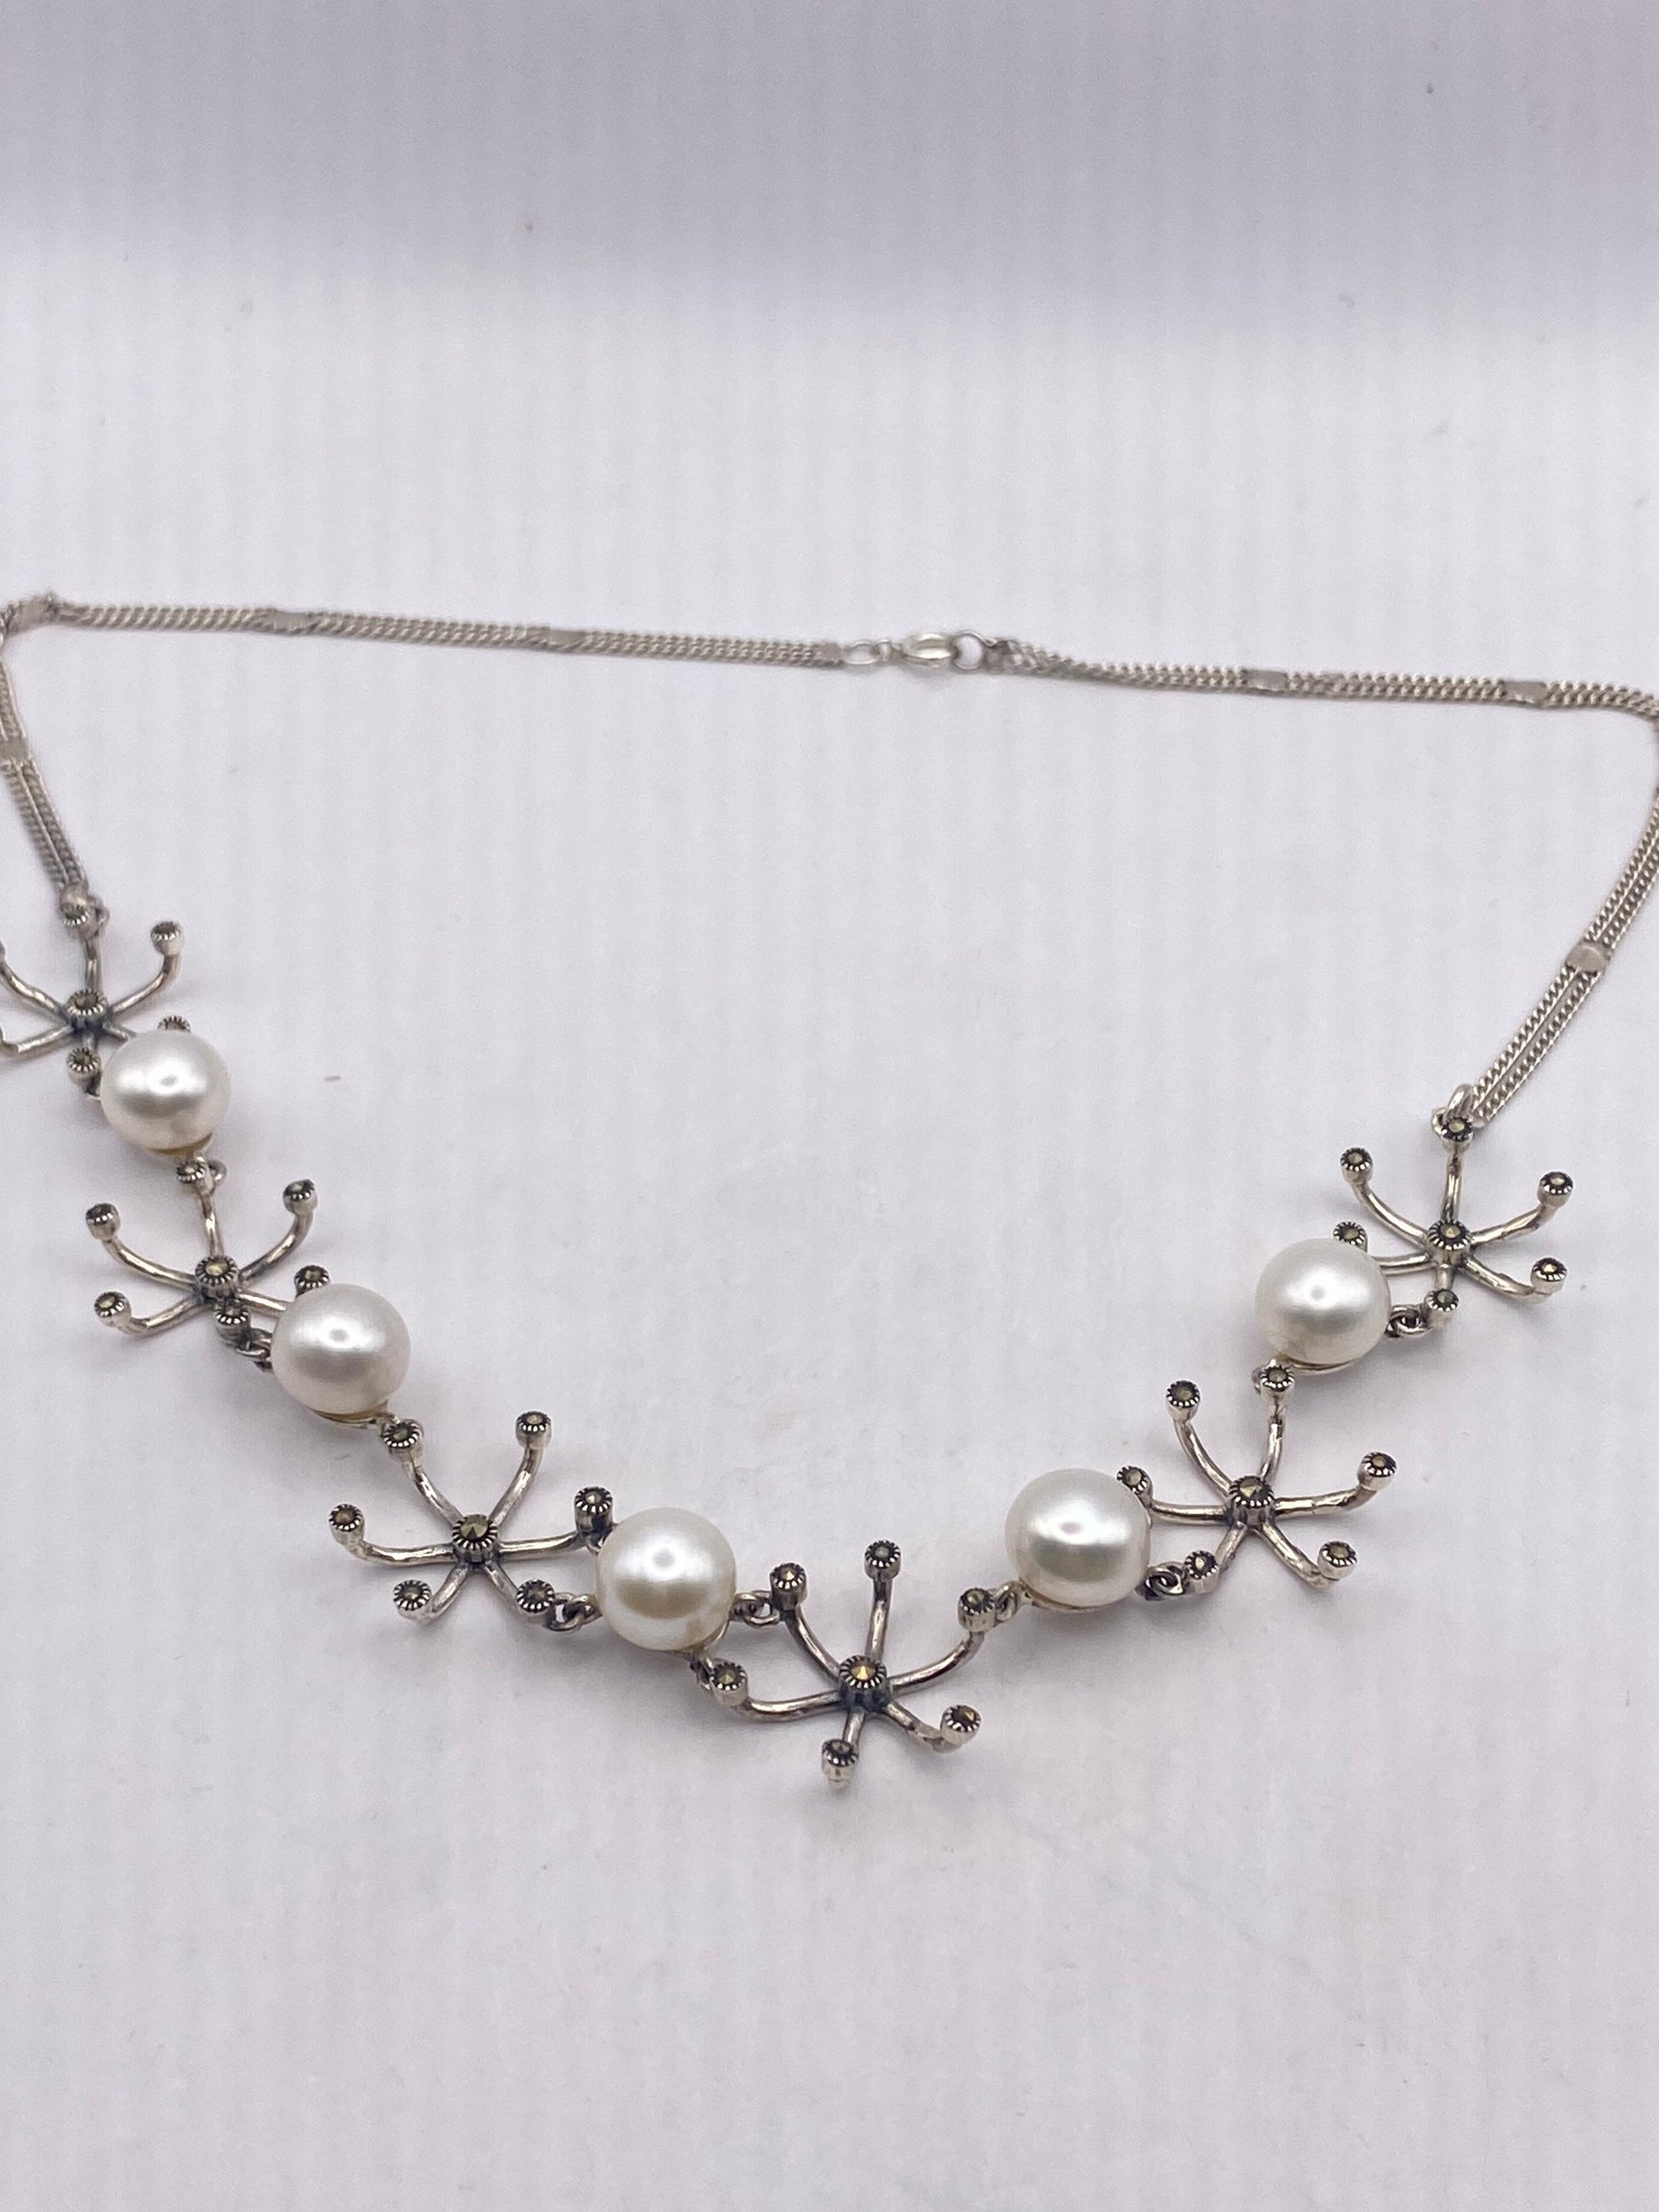 Vintage Pearl 925 Sterling Silver Marcasite Necklace Choker